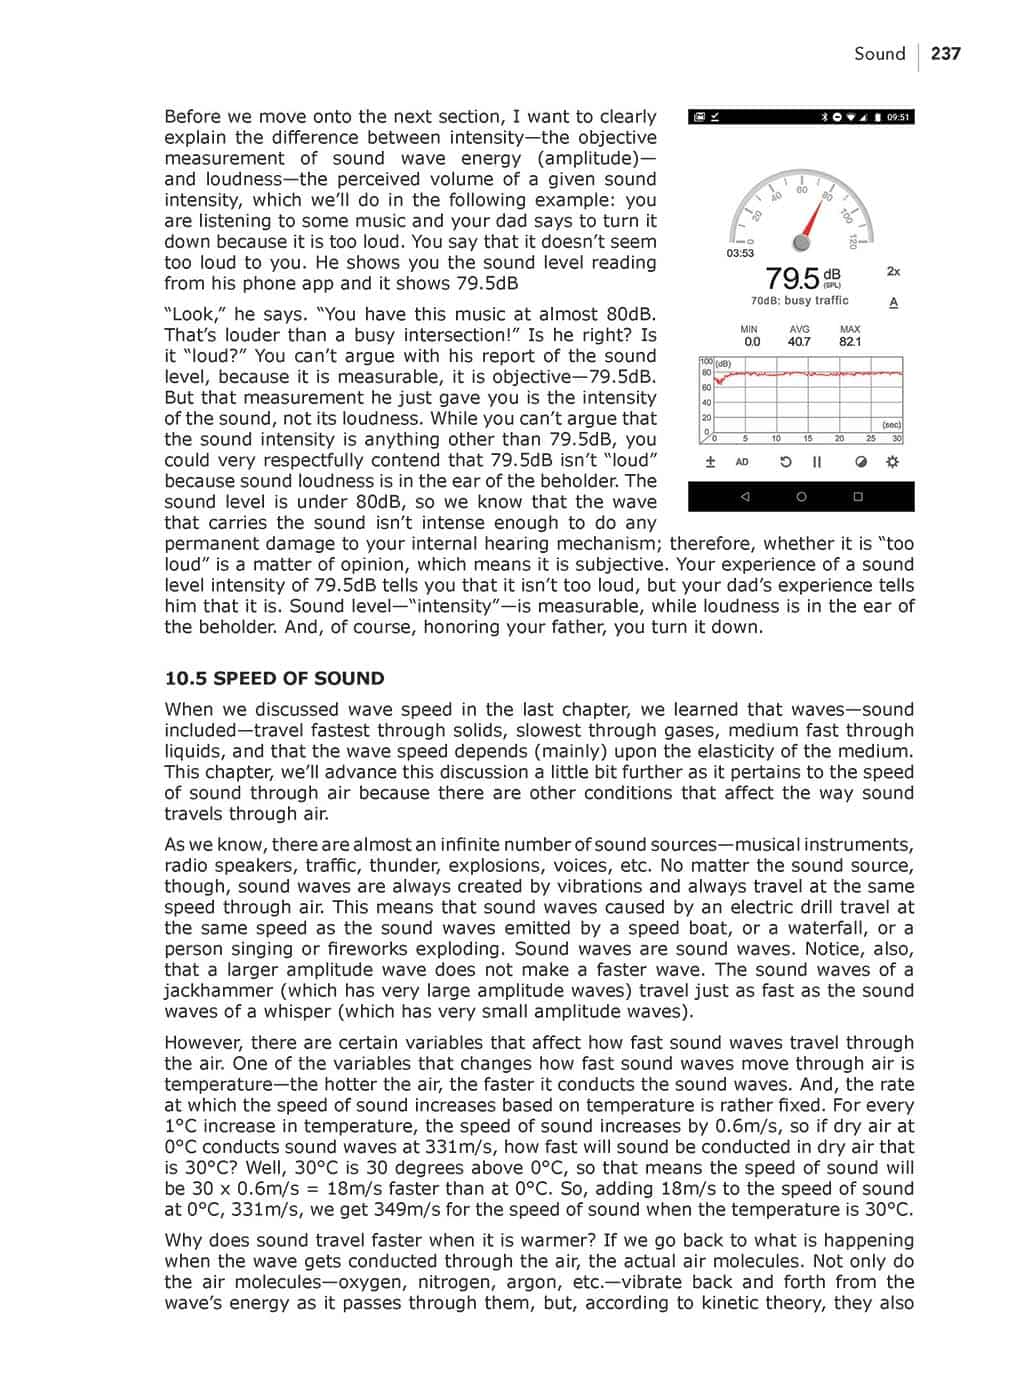 Homeschool science middle school physics chapter 10 sample page 2